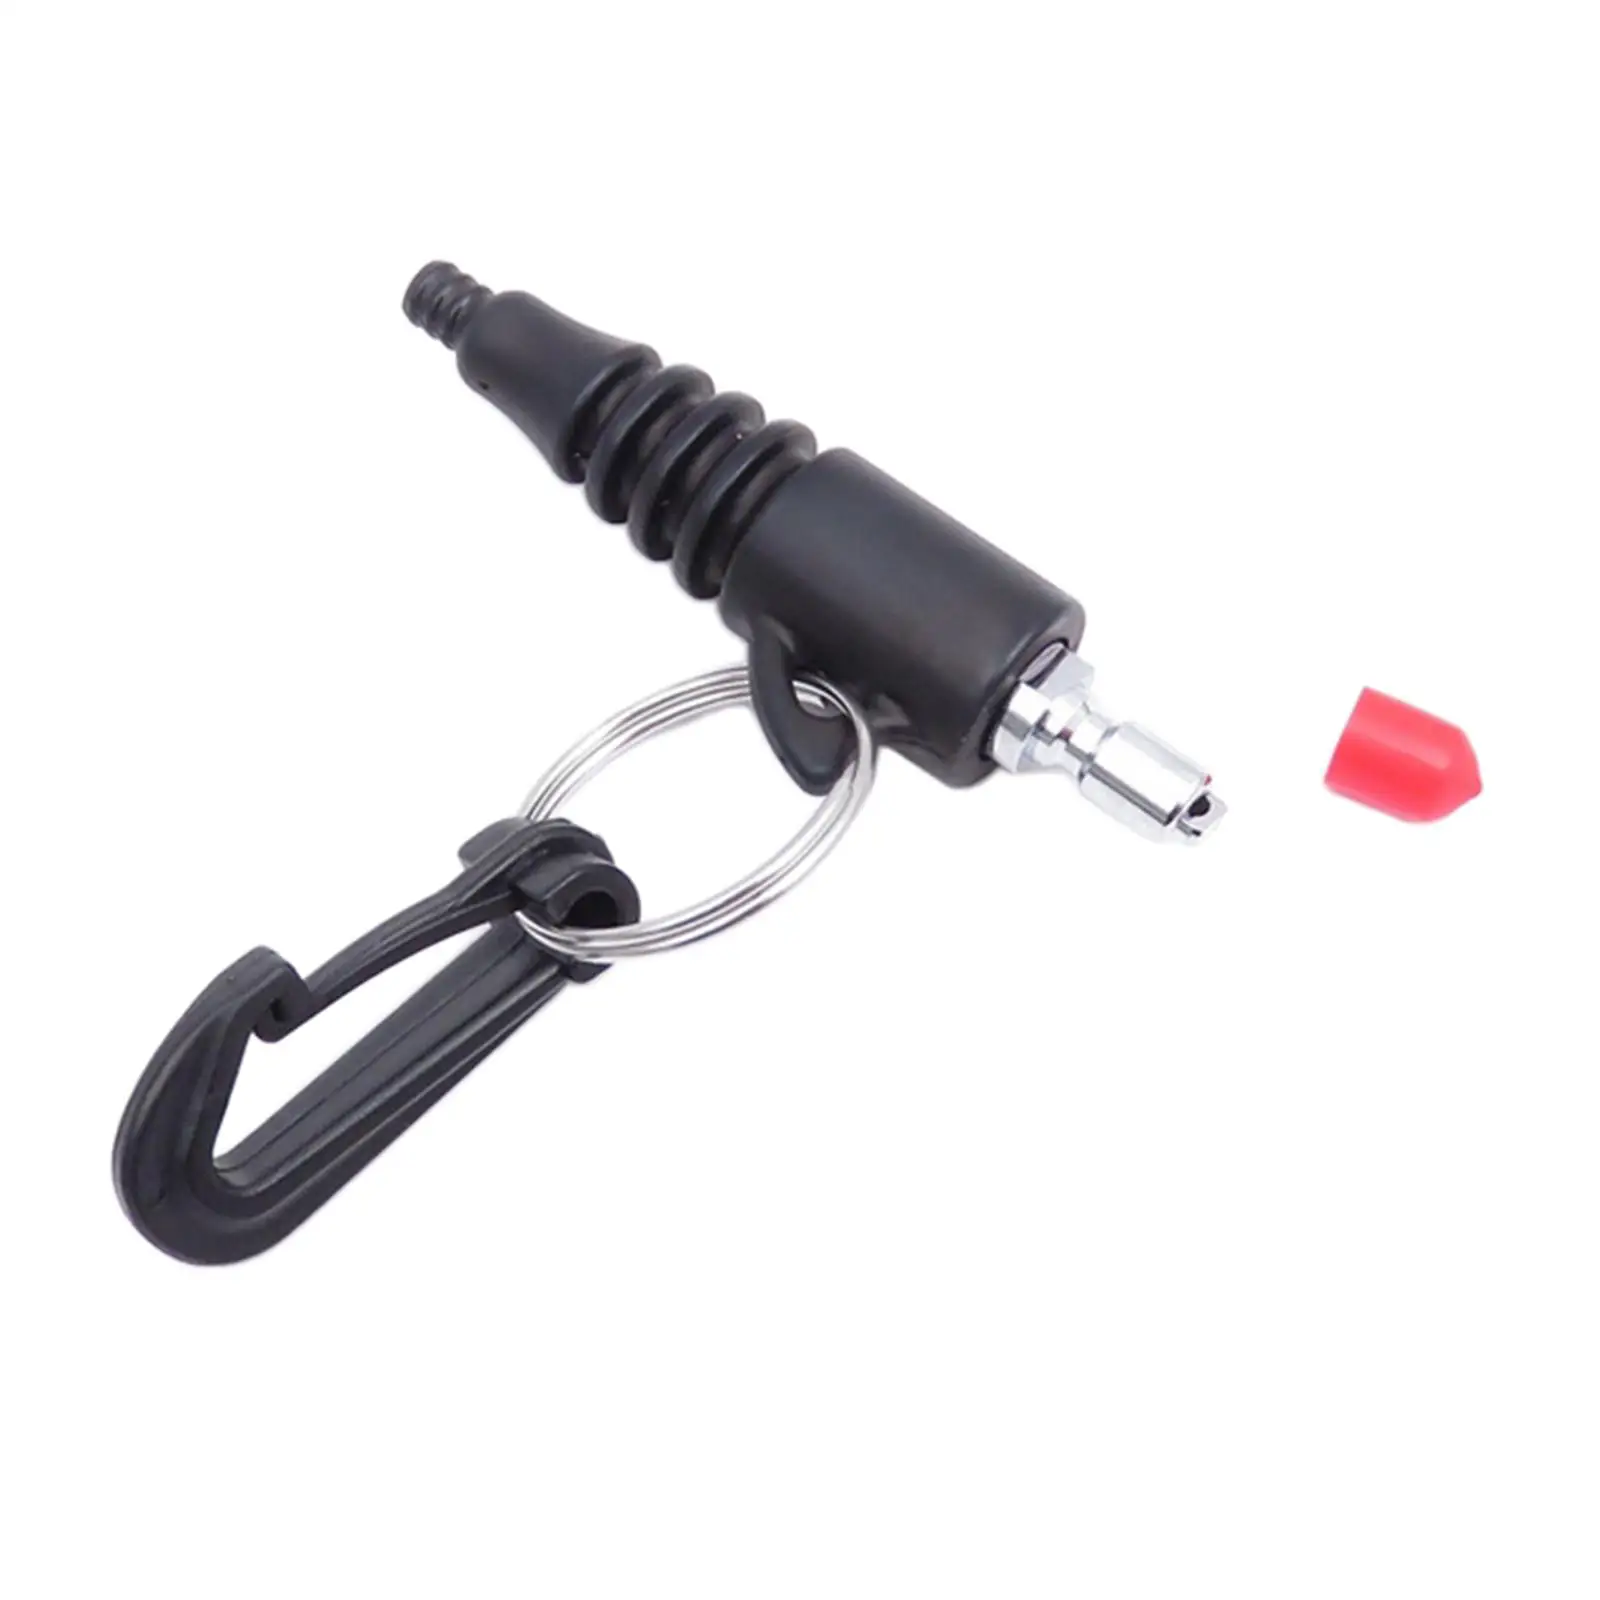 

Professional Scuba Diving Air Nozzle for Standard BC BCD Inflator Hose Diver Snorkeling Watersports Photographic Cleaning Tools